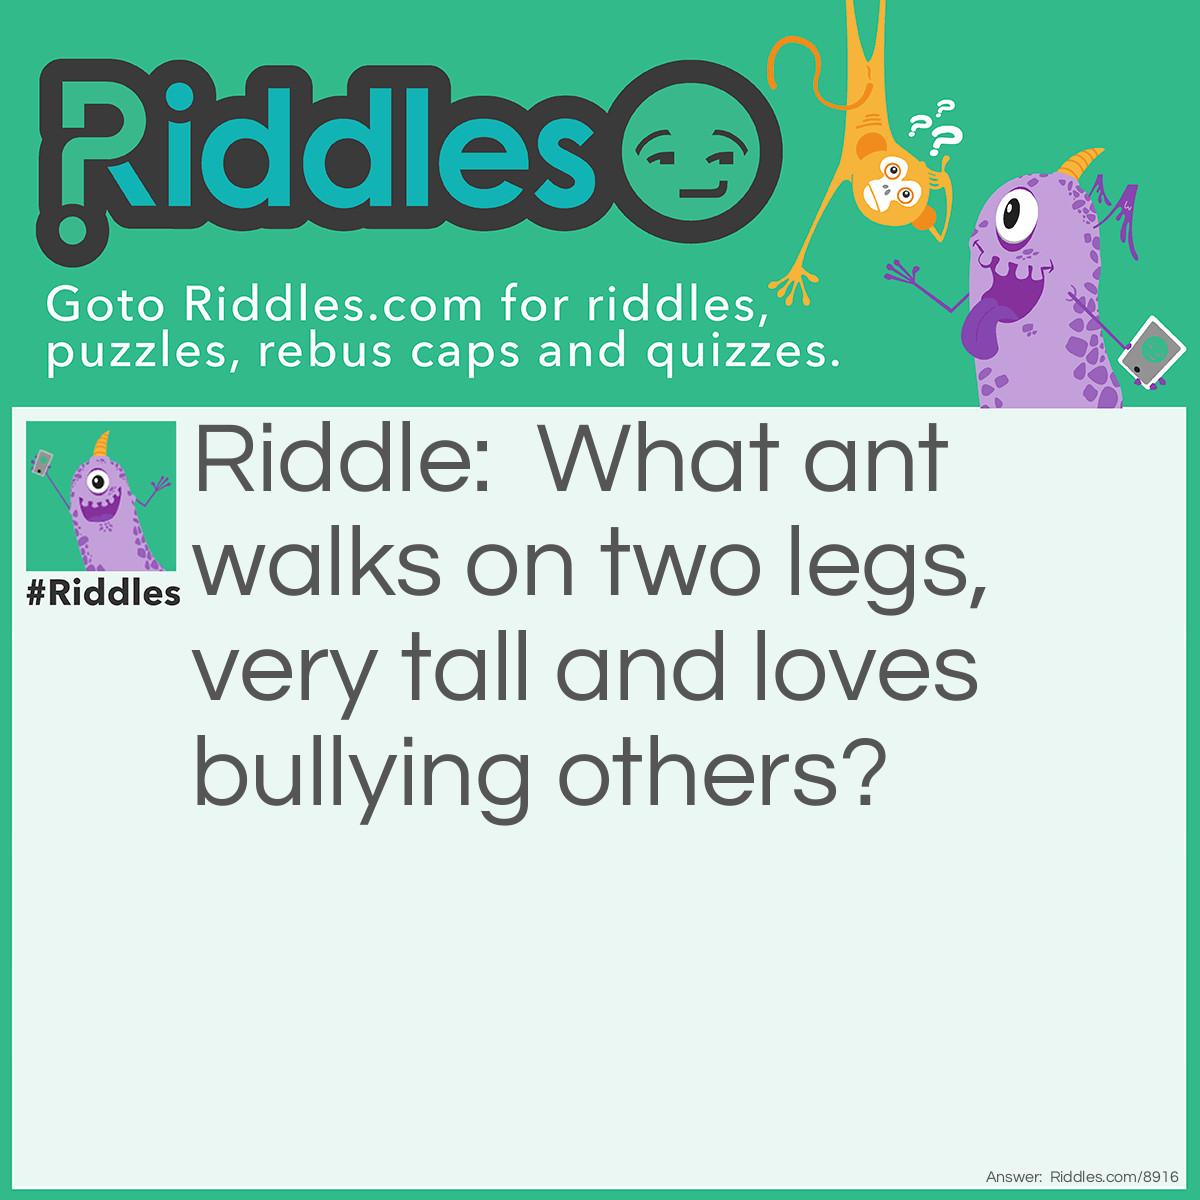 Riddle: What ant walks on two legs, very tall and loves bullying others? Answer: Giant!